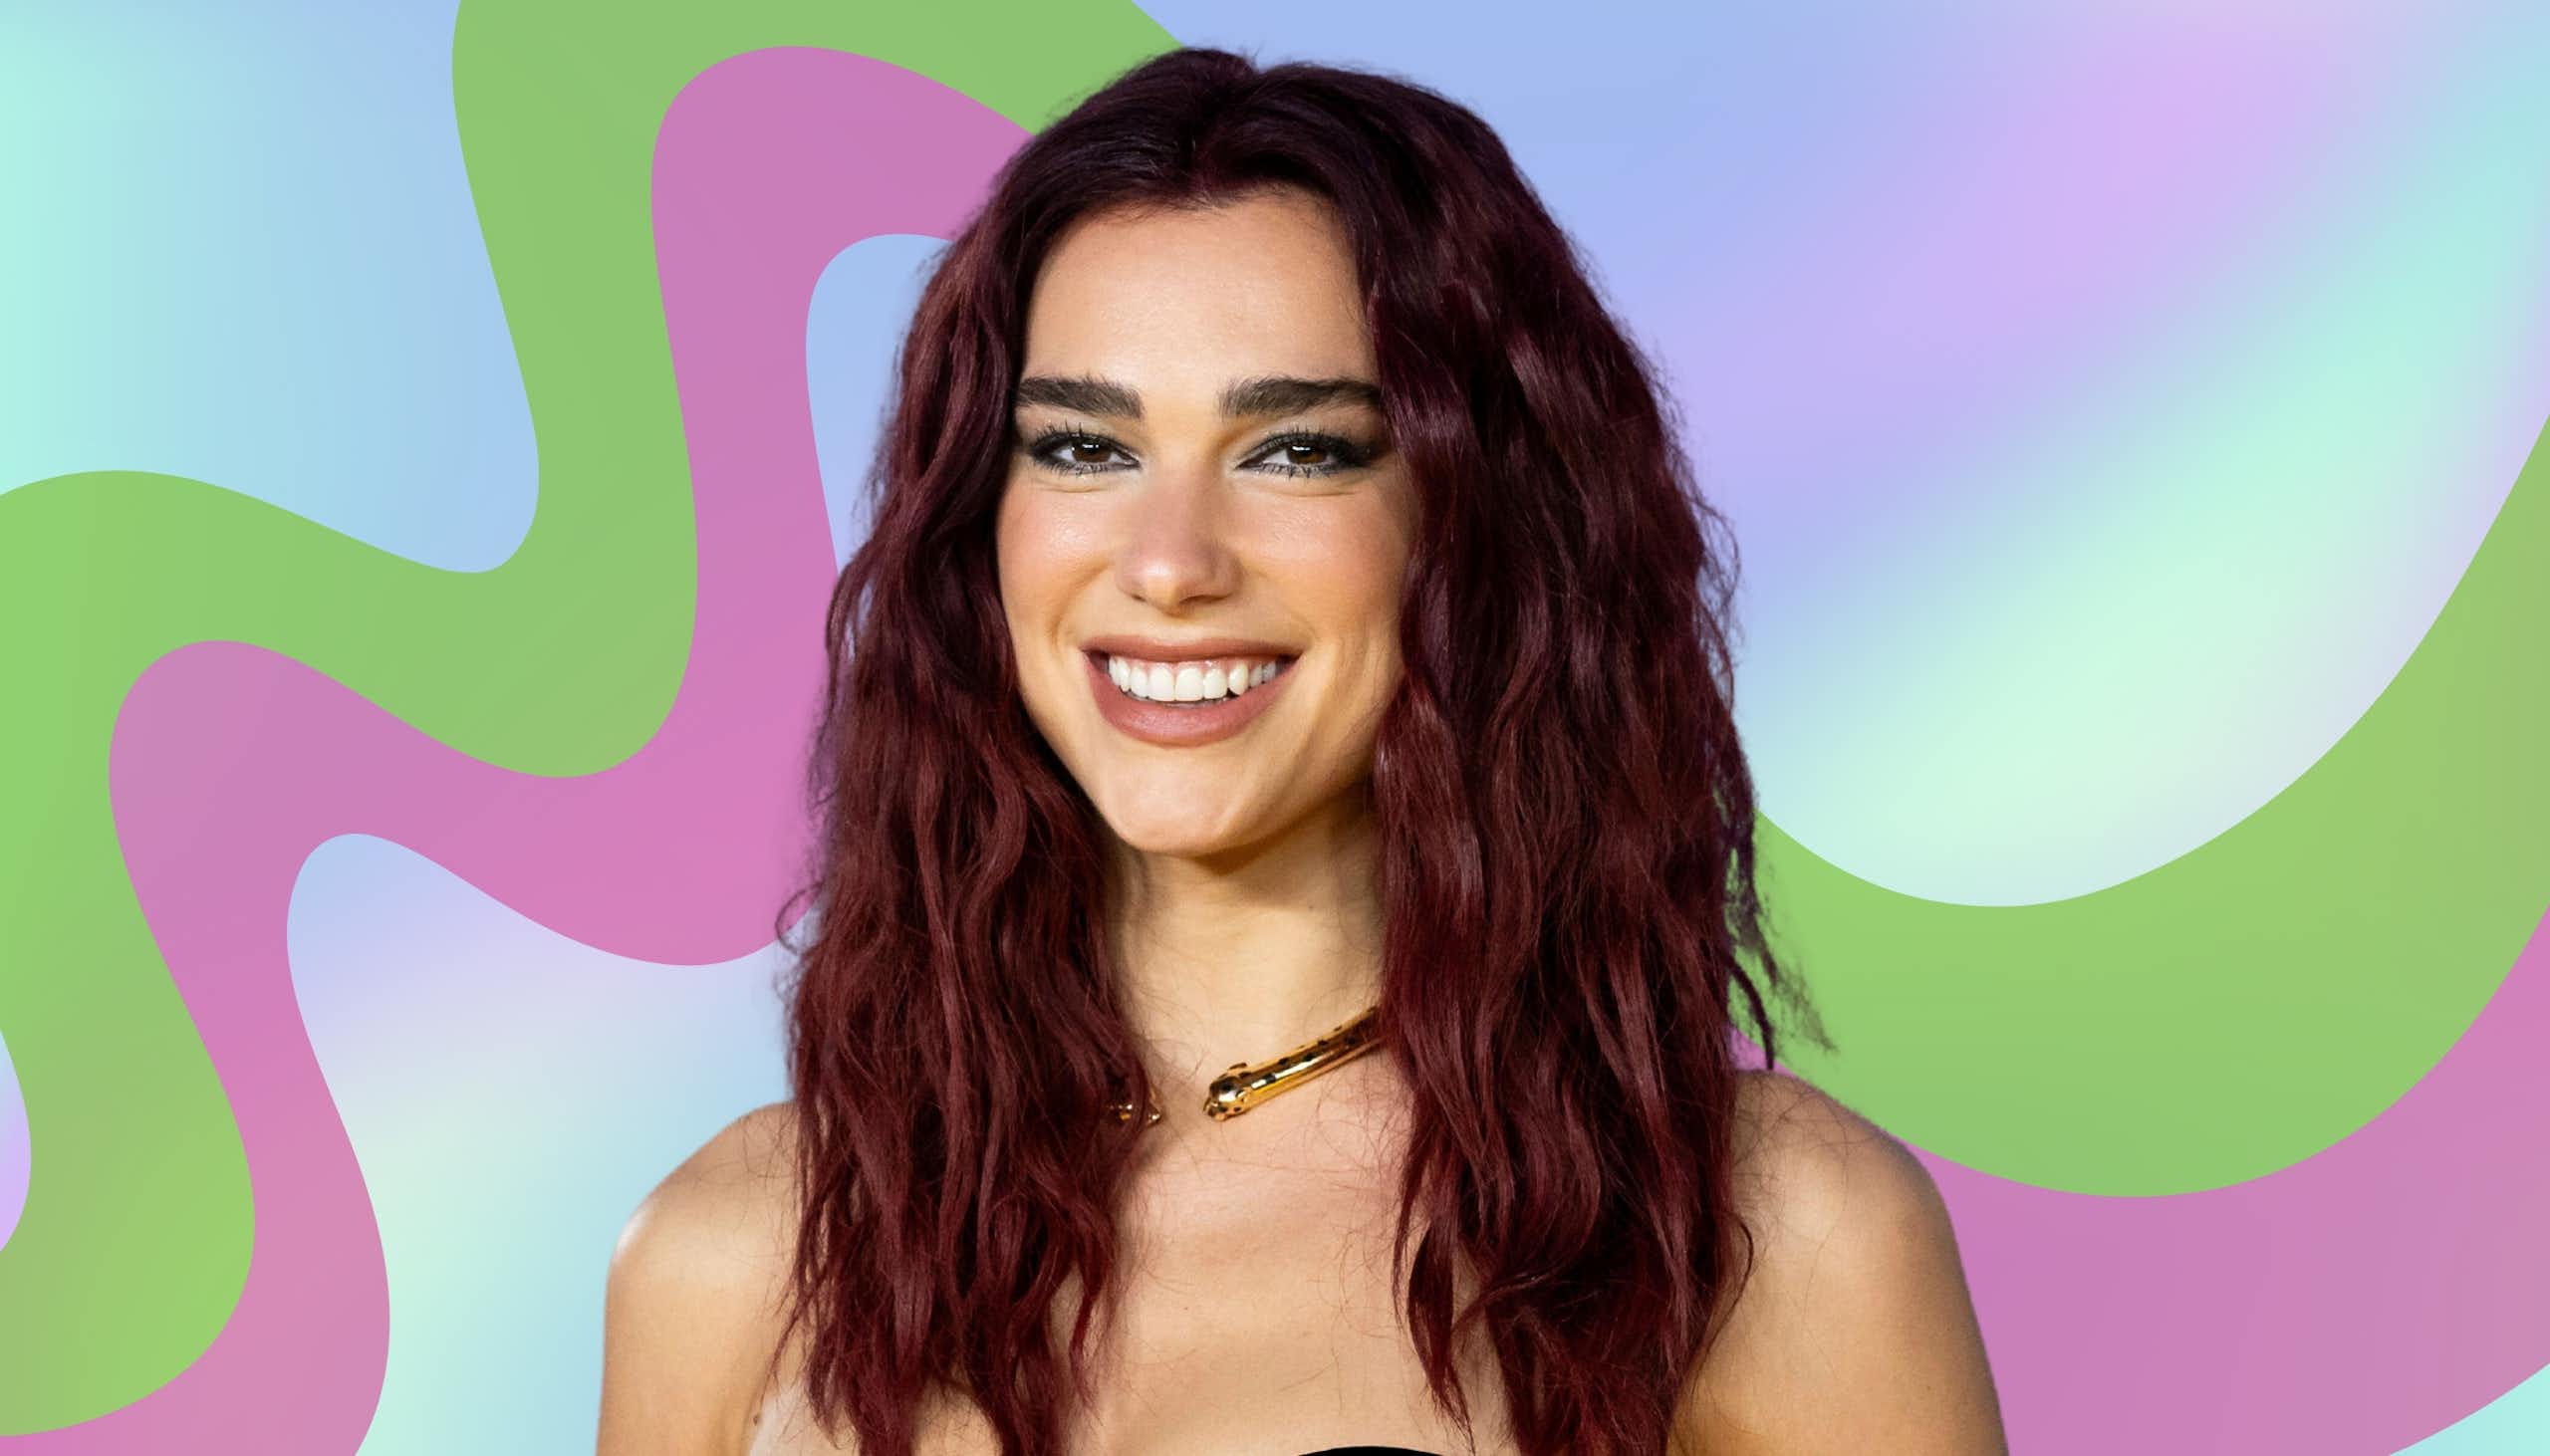 Dua Lipa smiling with a pattern behind her